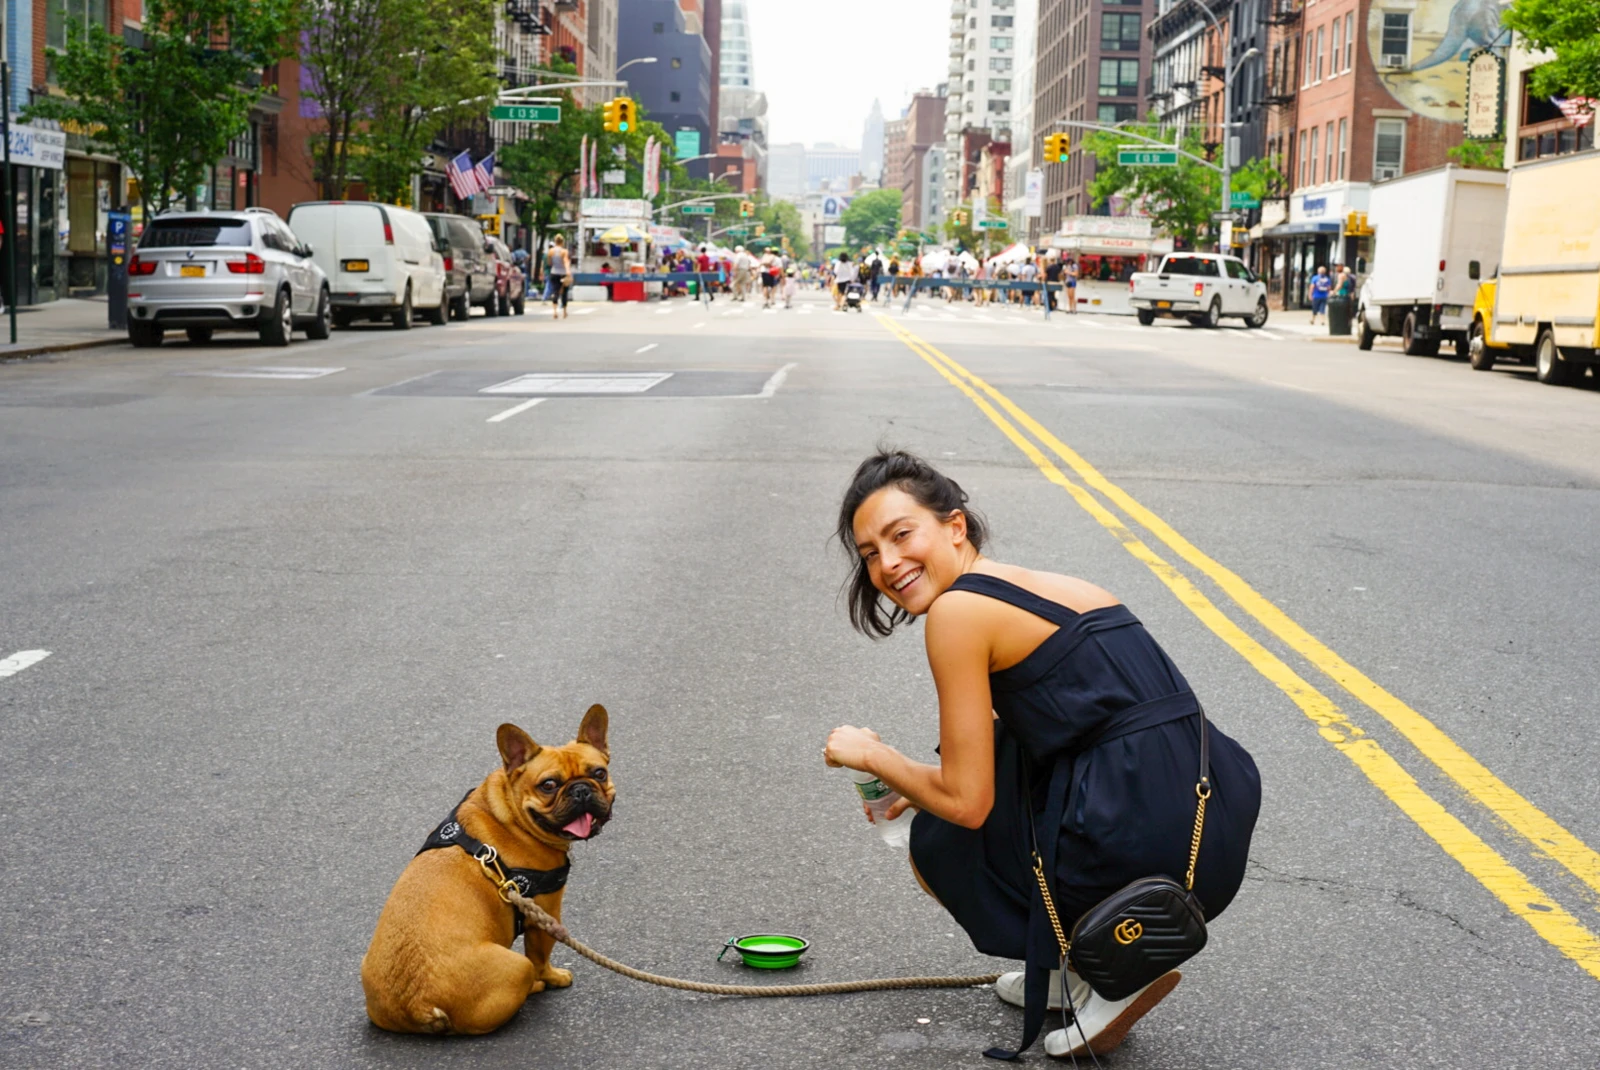 Dog and woman stand in street in NYC with buildings in background